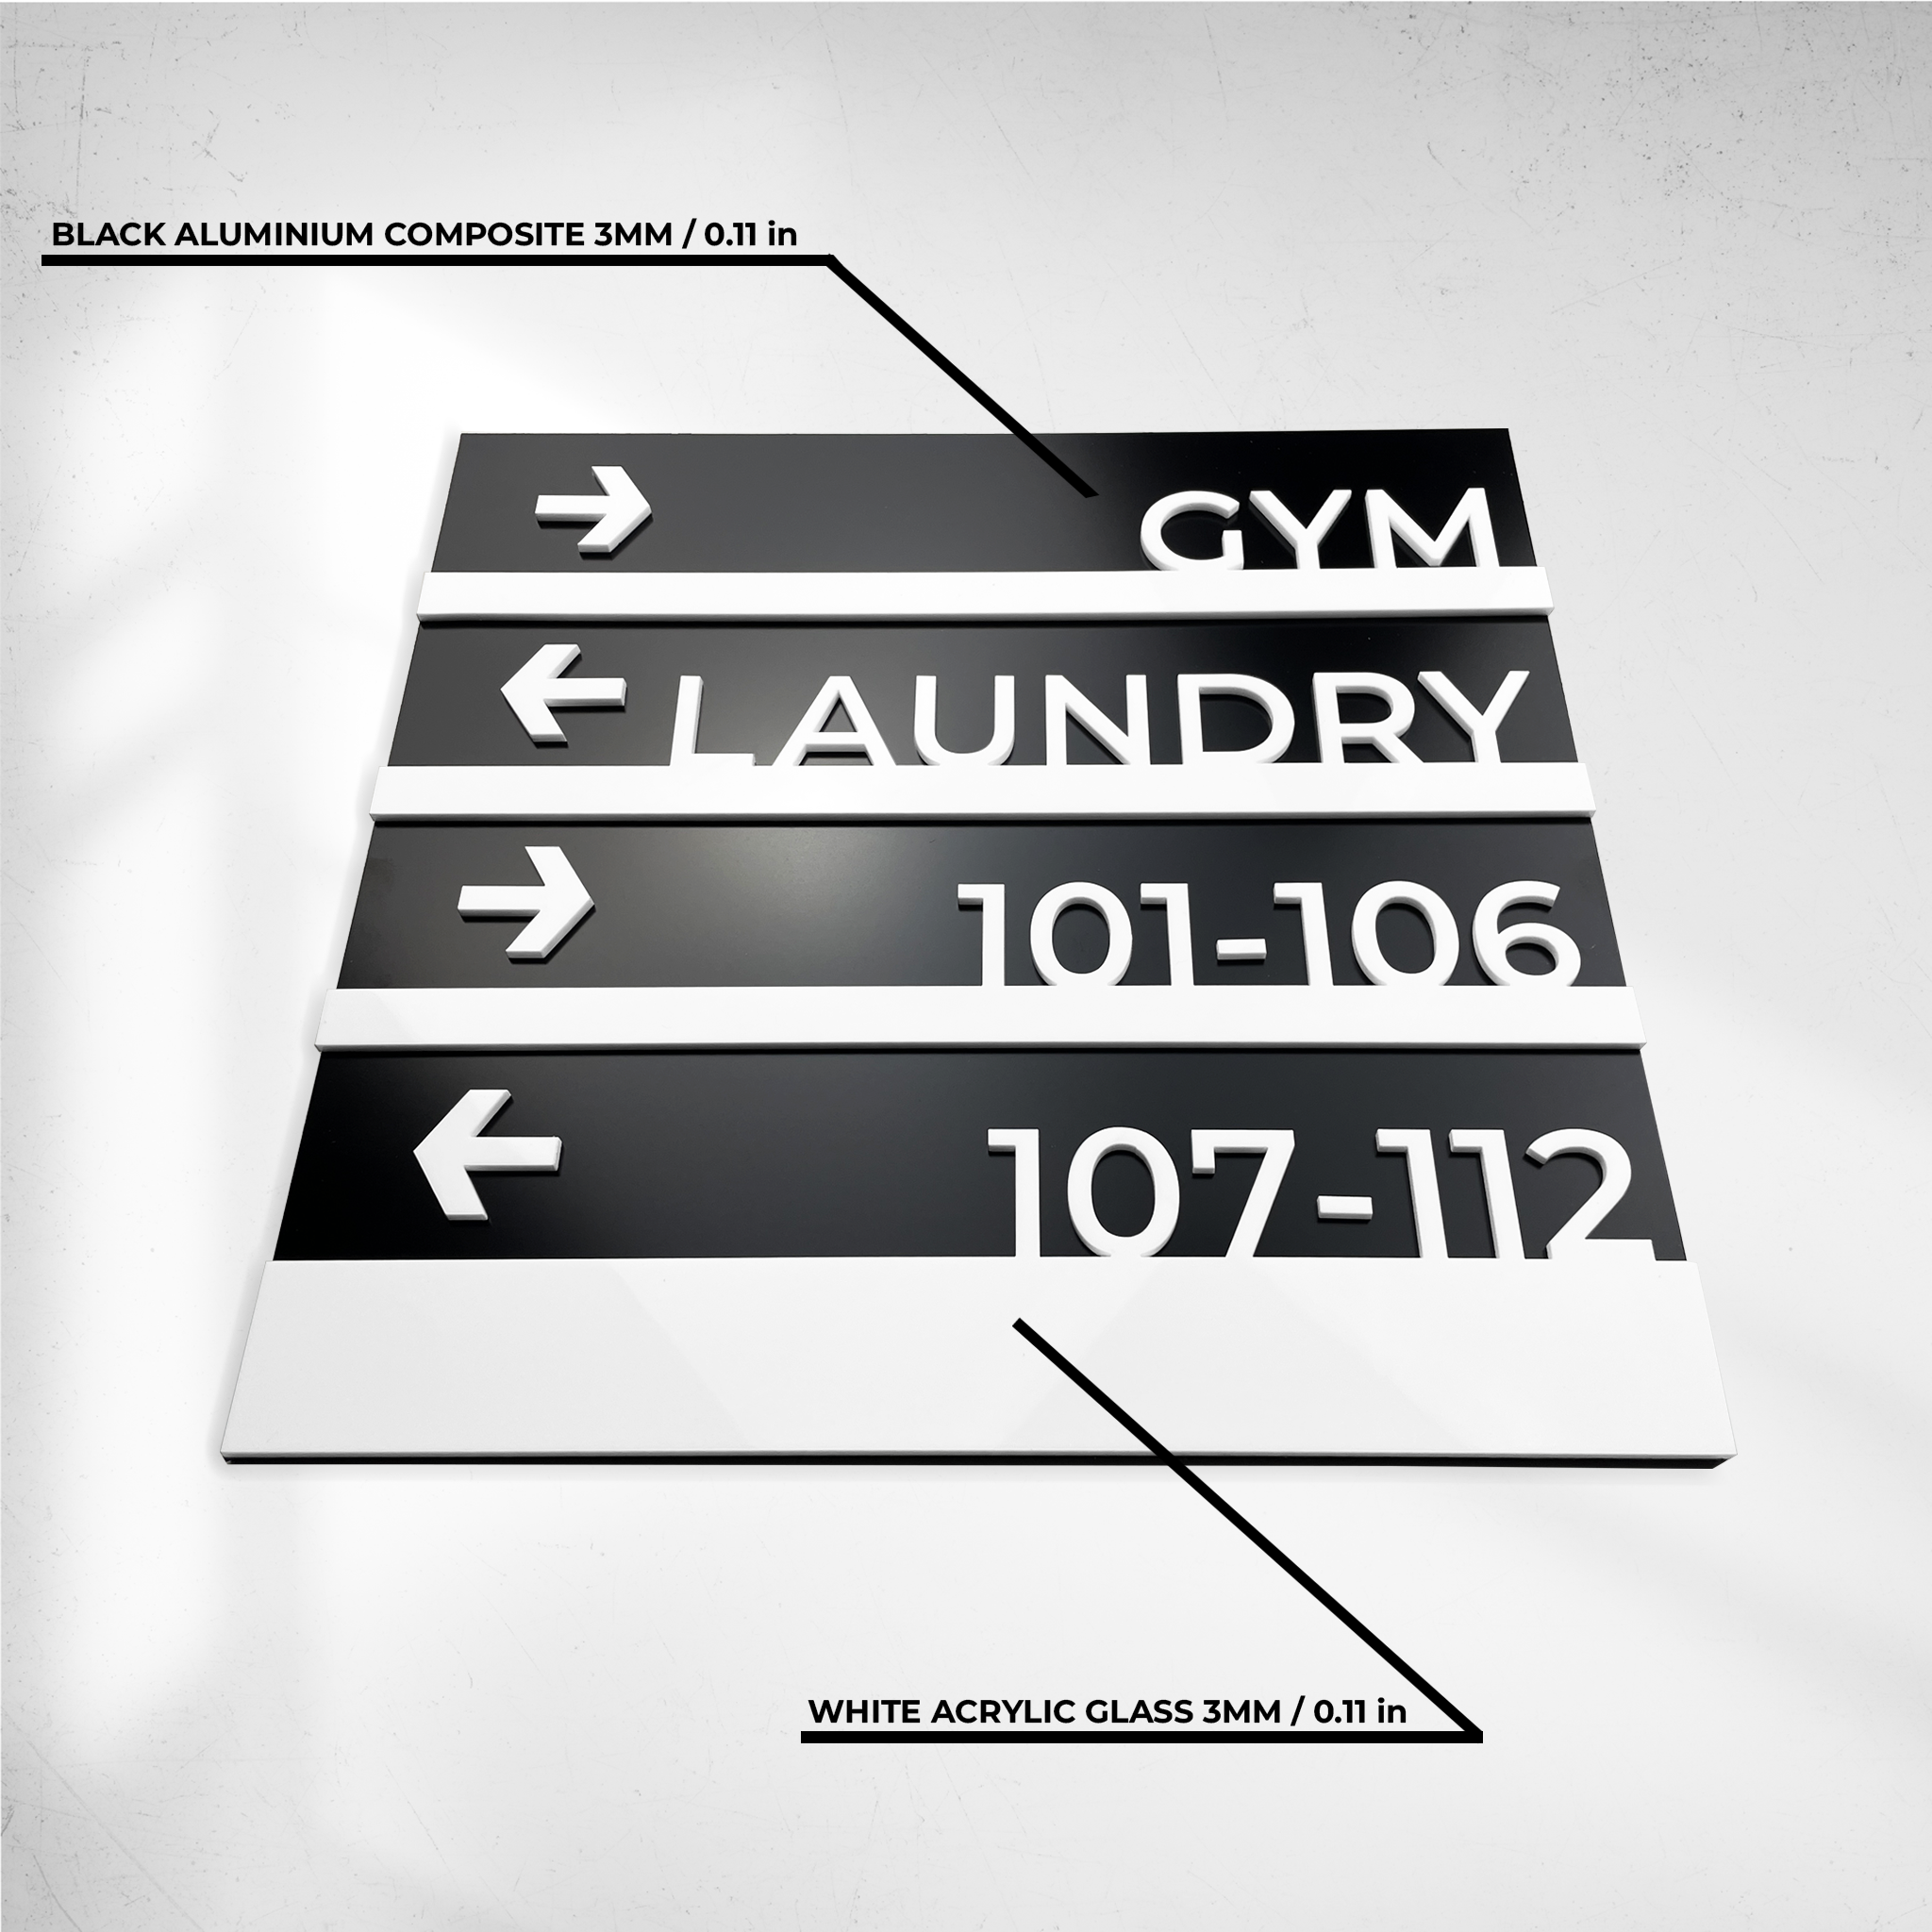 Custom-sized hotel wayfinding sign for spa and gym in sophisticated black and white design